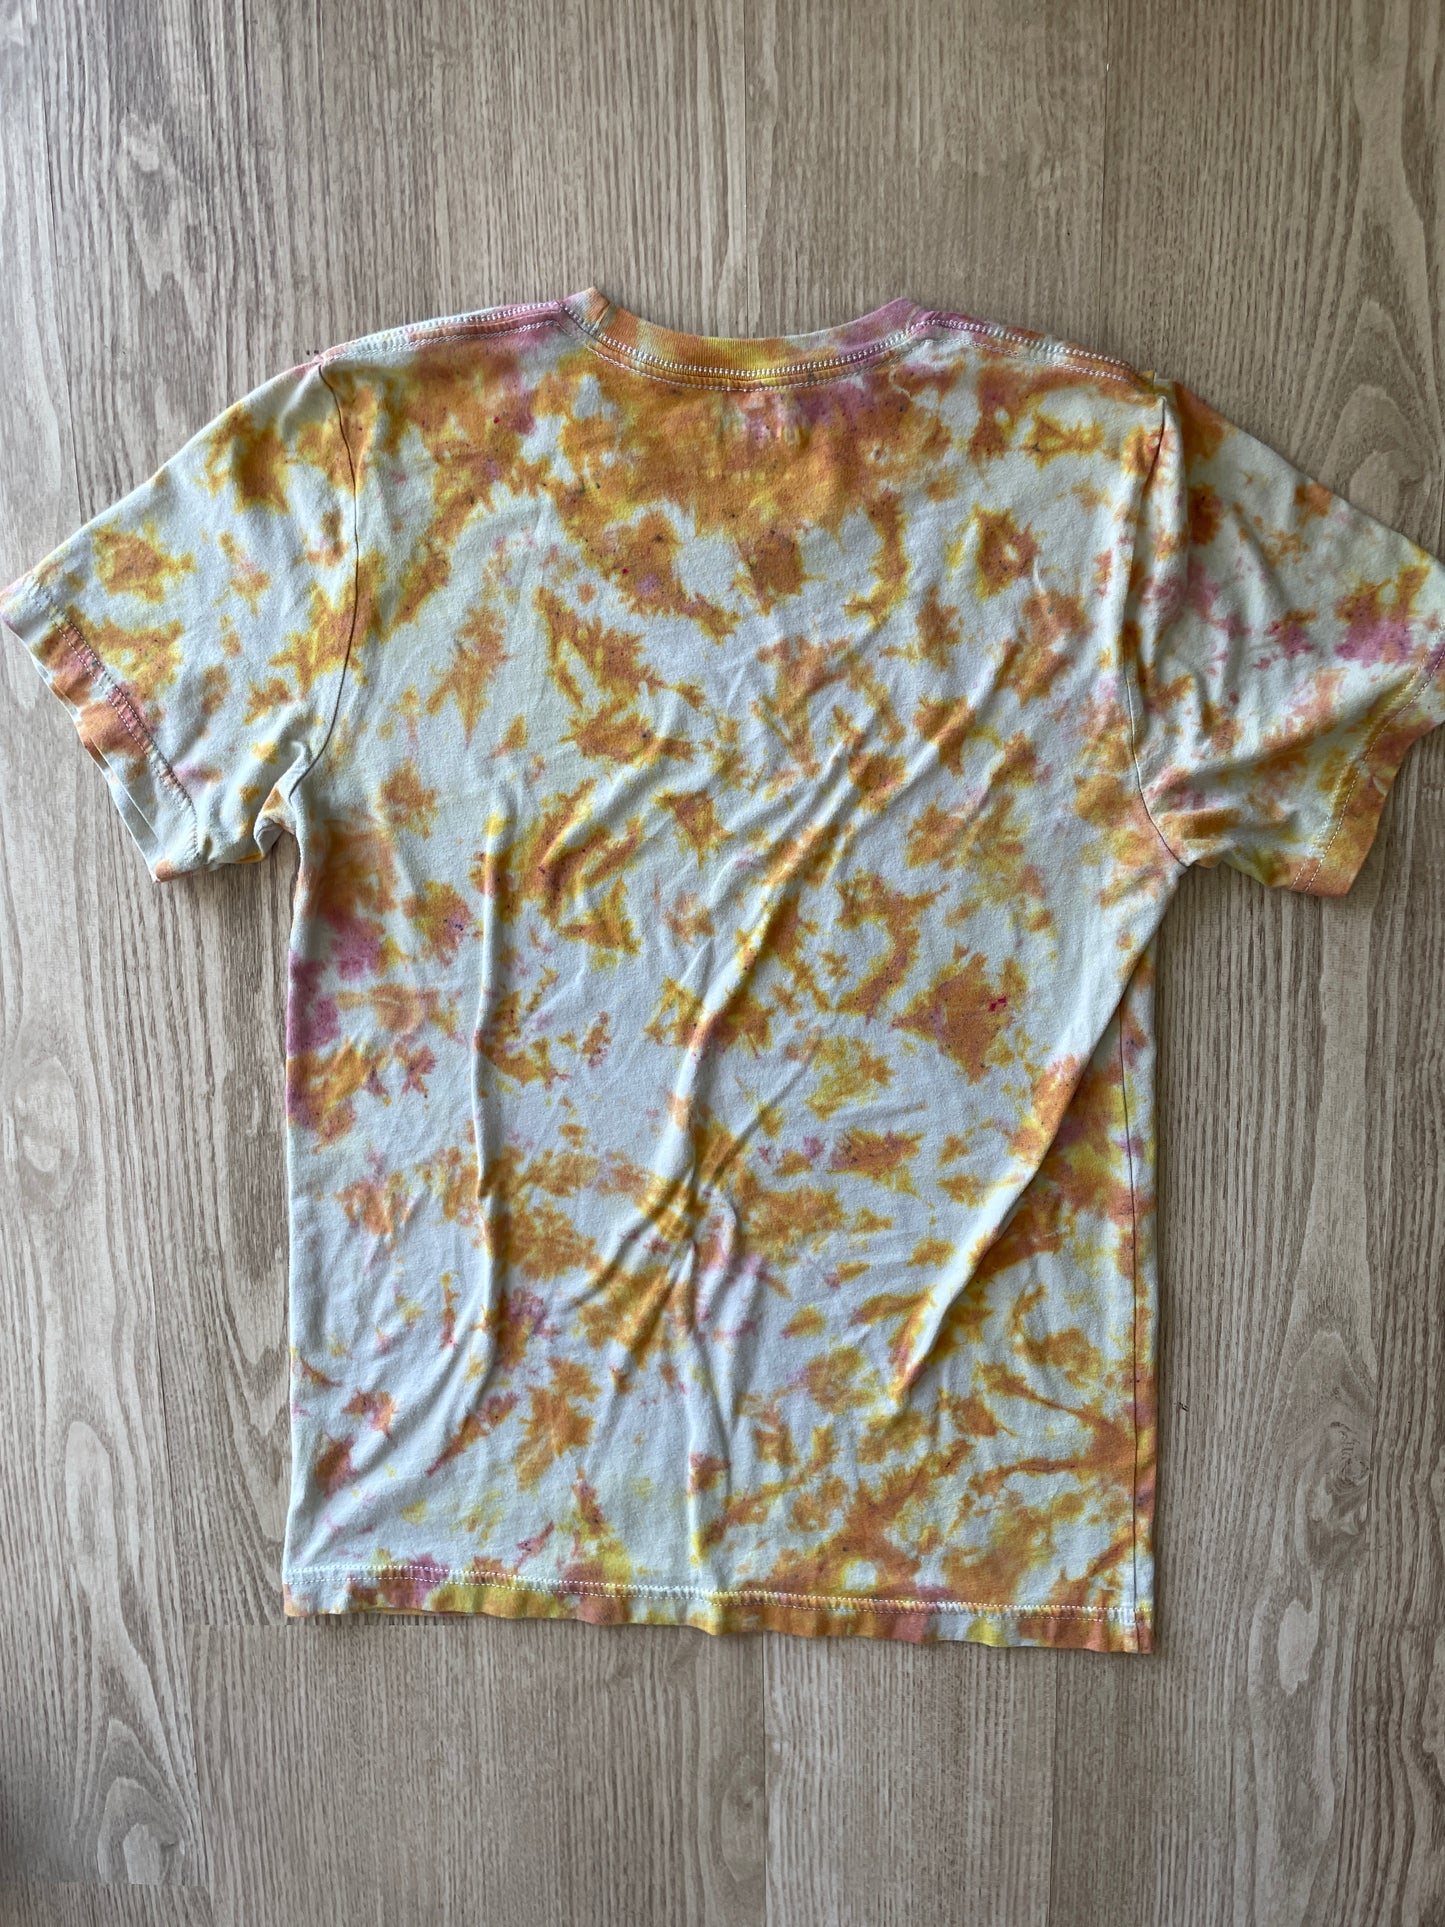 SMALL Men’s Groovy Skeleton Handmade Tie Dye T-Shirt | One-Of-a-Kind Pastel Pink and Orange Short Sleeve